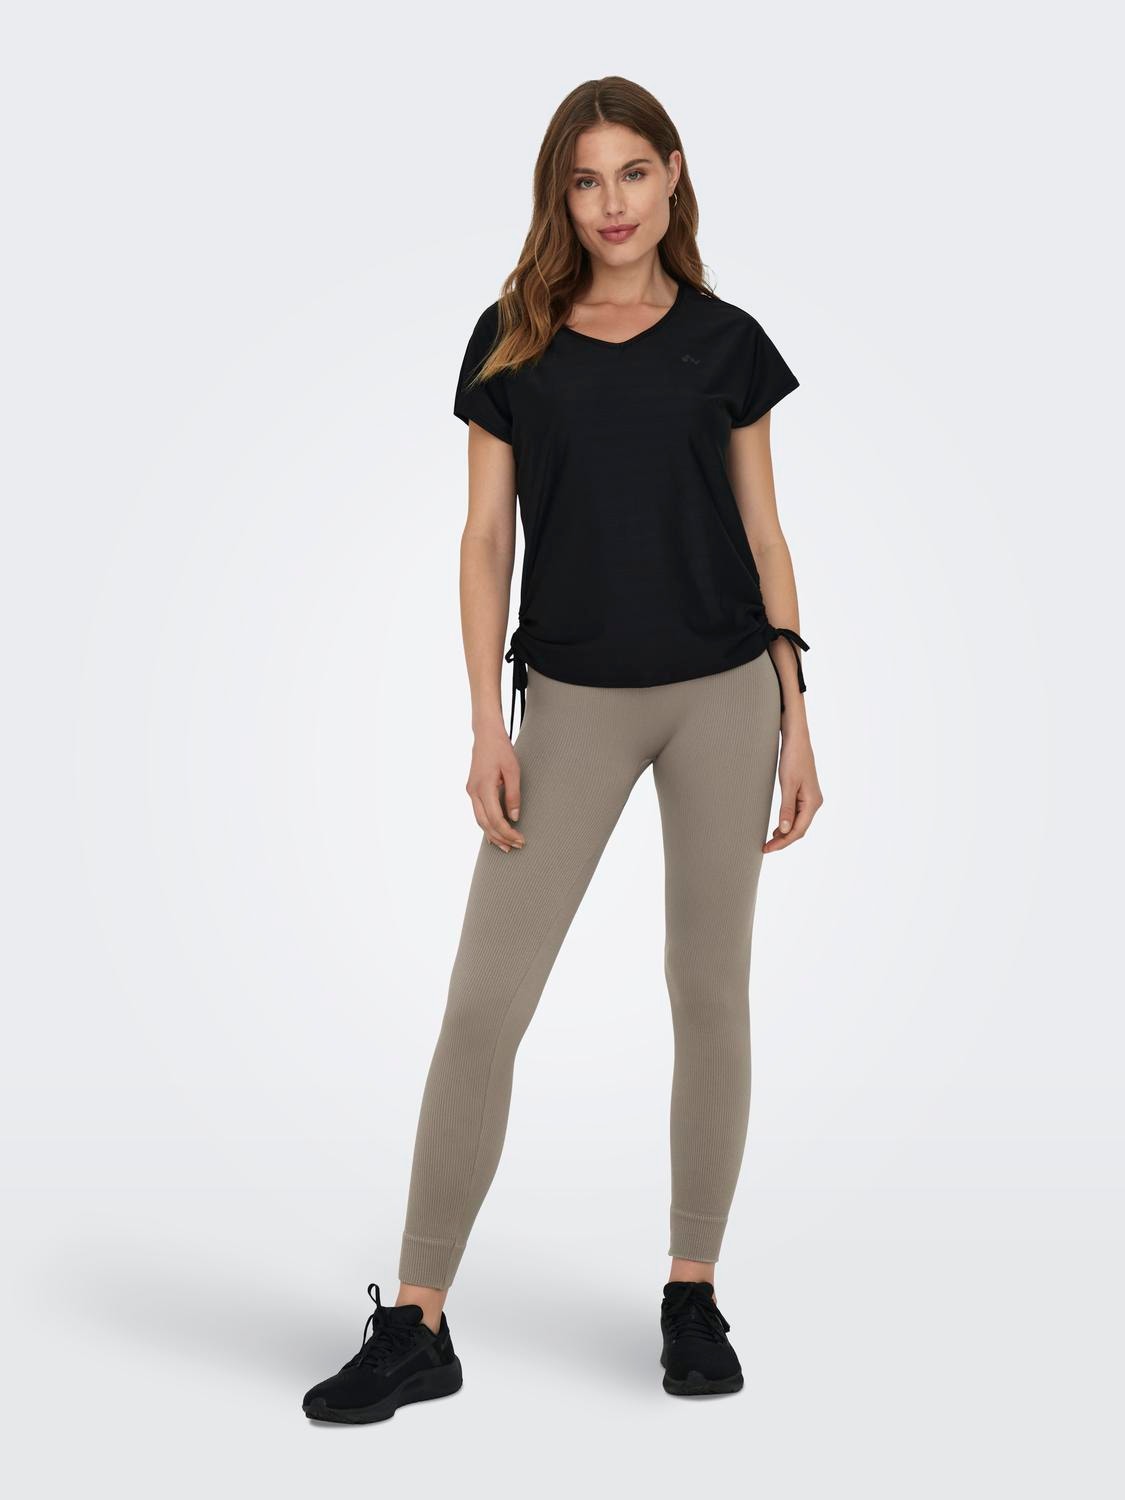 ONLY Tight Fit High waist Leggings -Falcon - 15250052